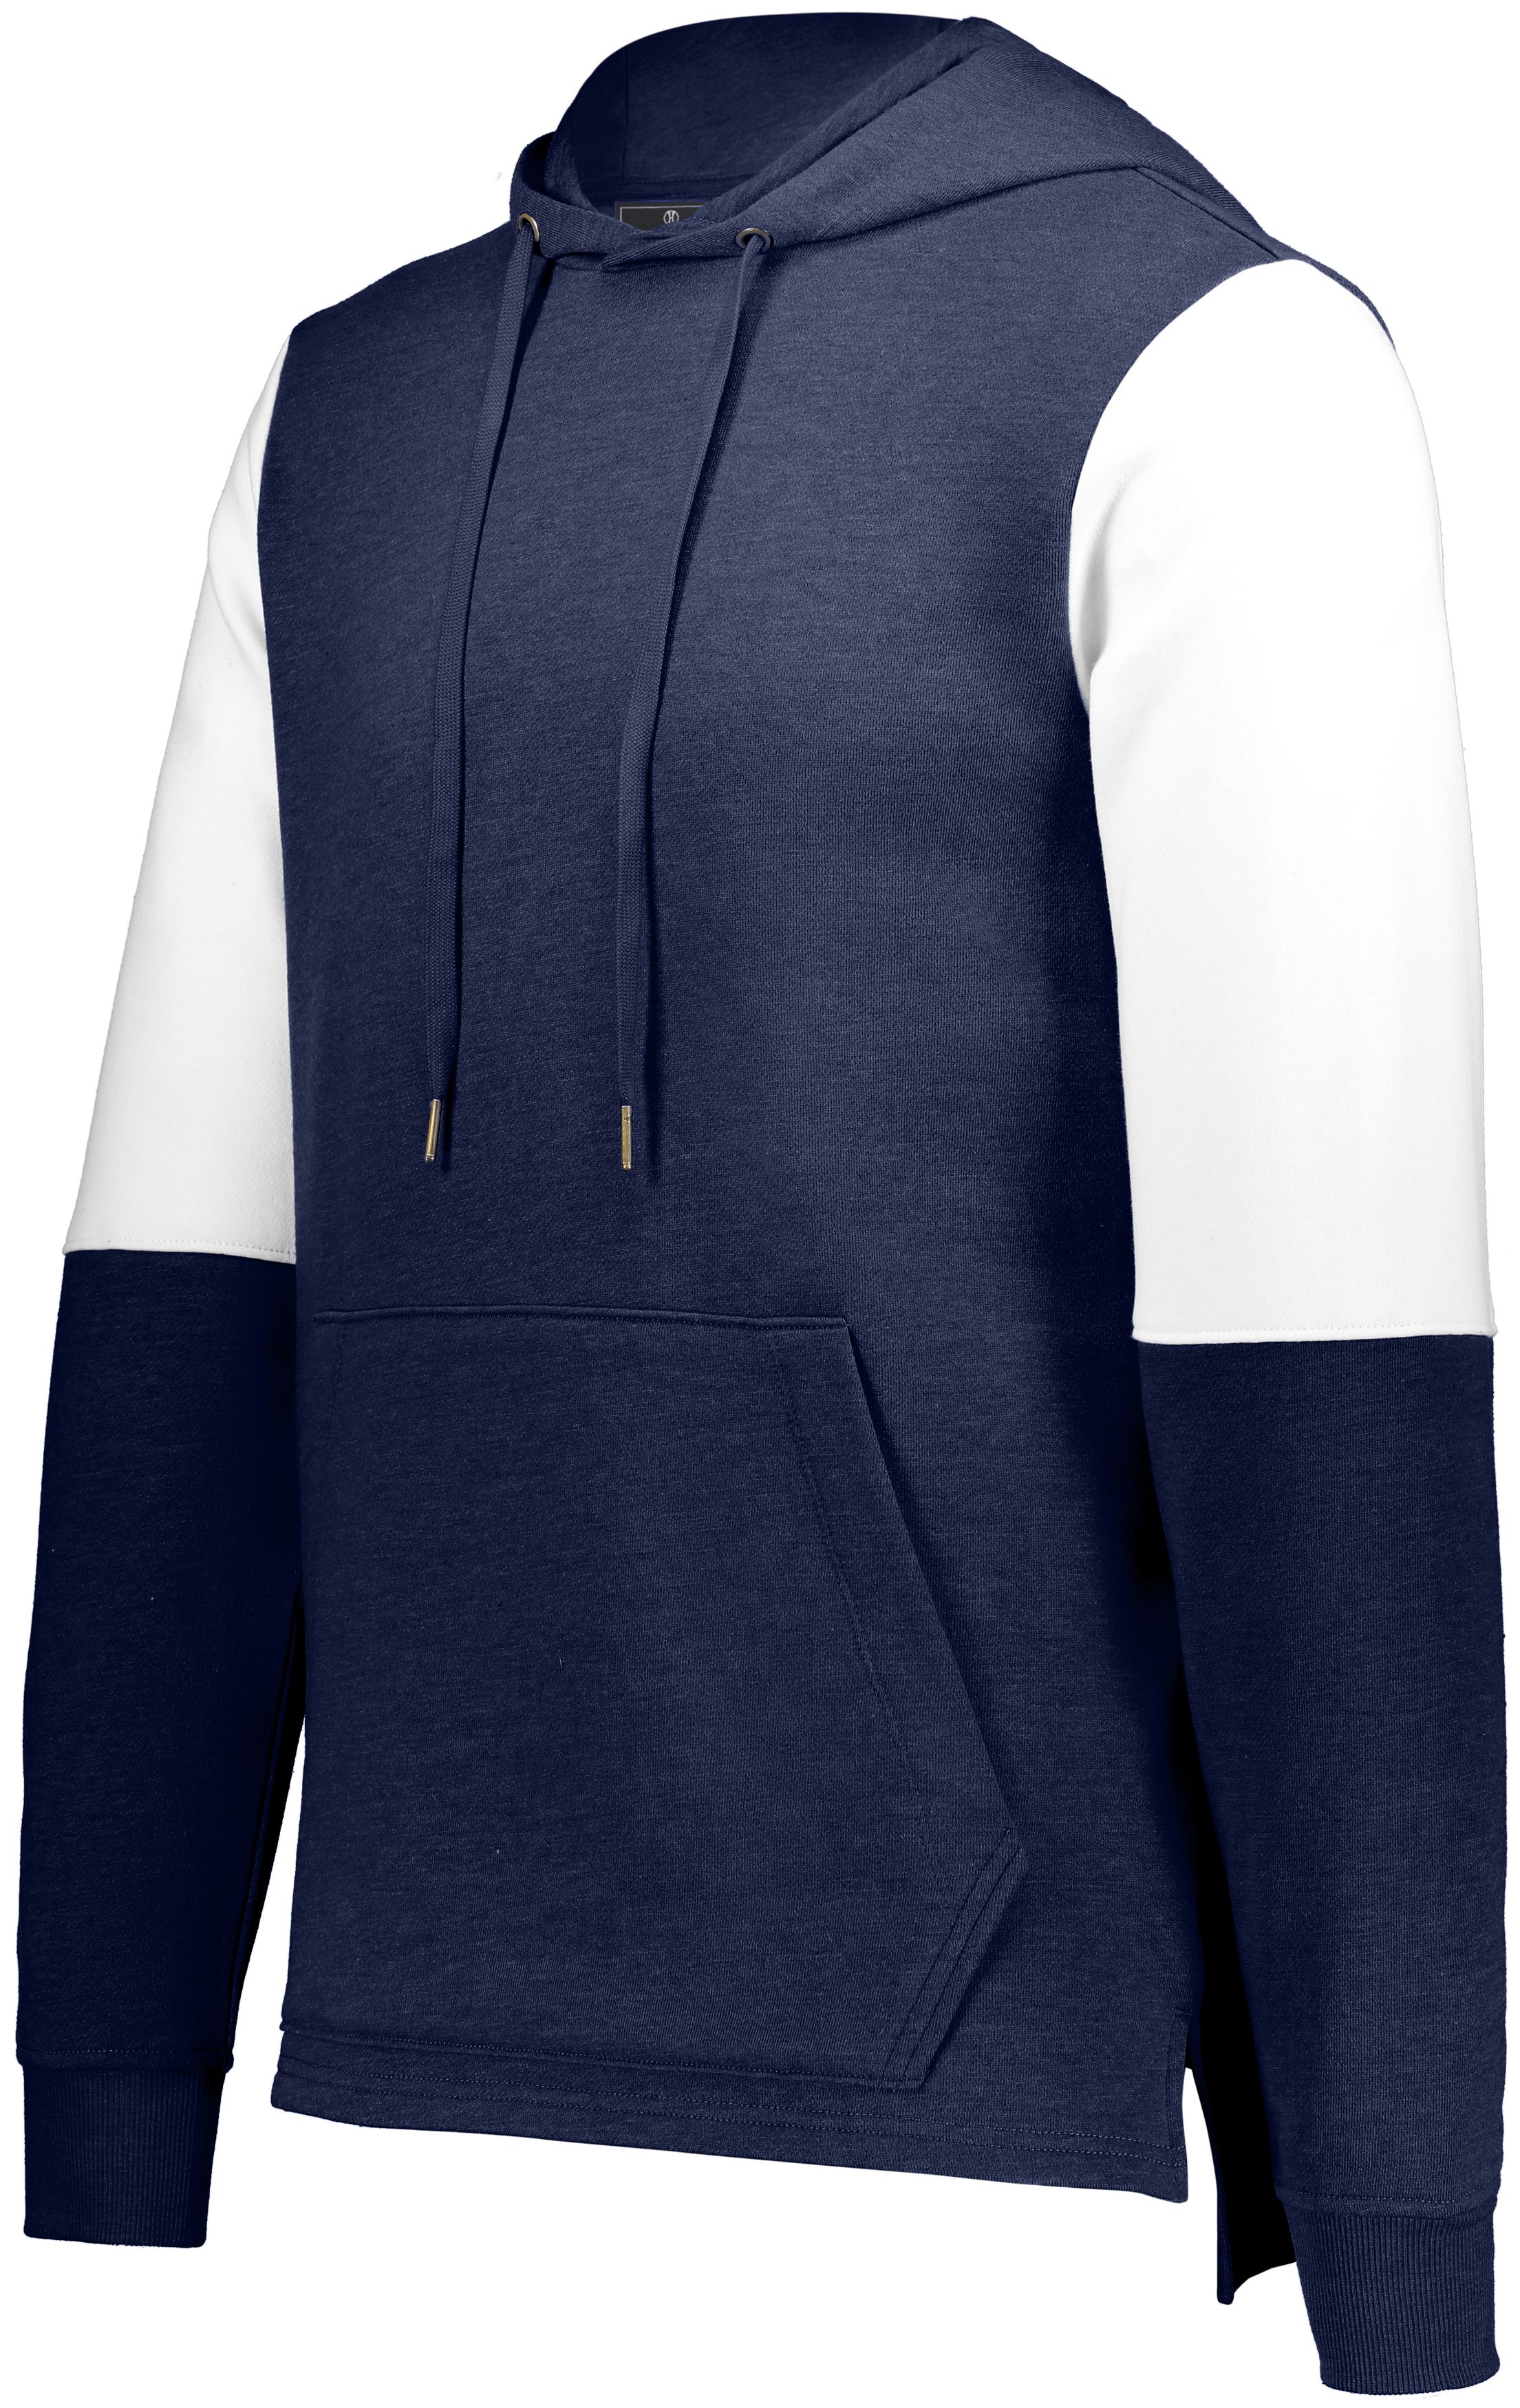 click to view Navy Heather/White